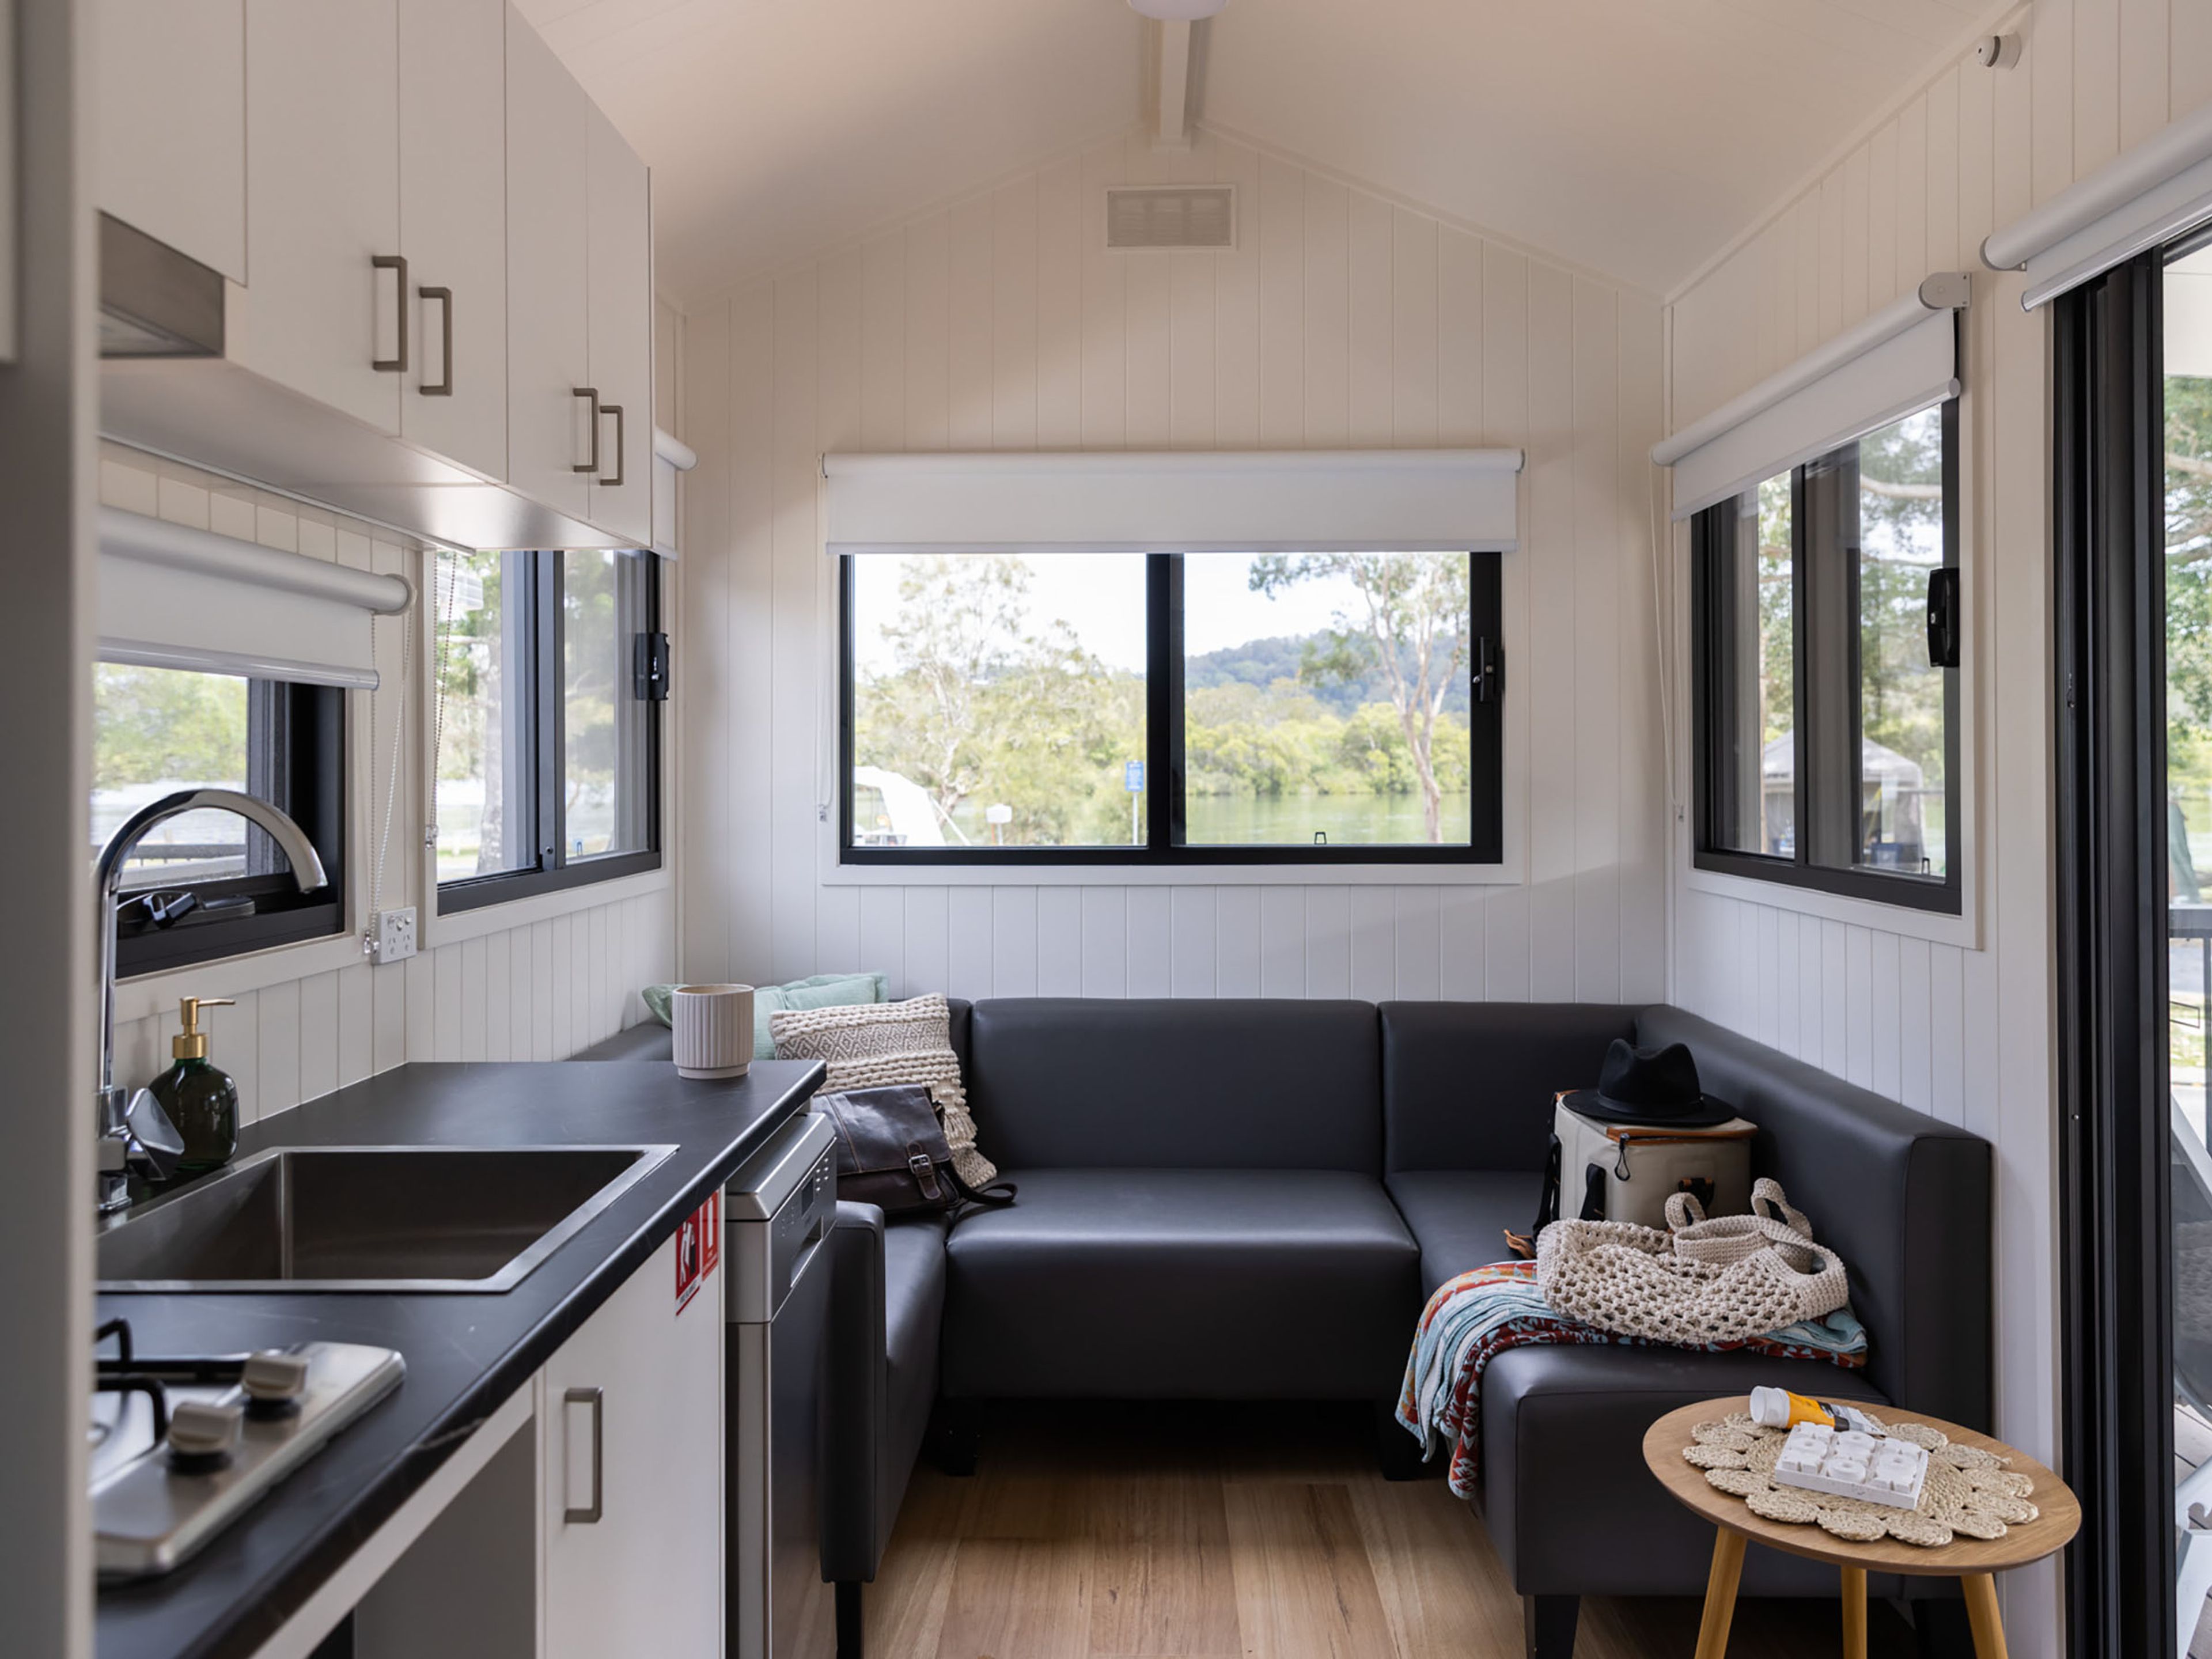 Reflections Holidays Ferry Reserve holiday & caravan park tiny home interior view